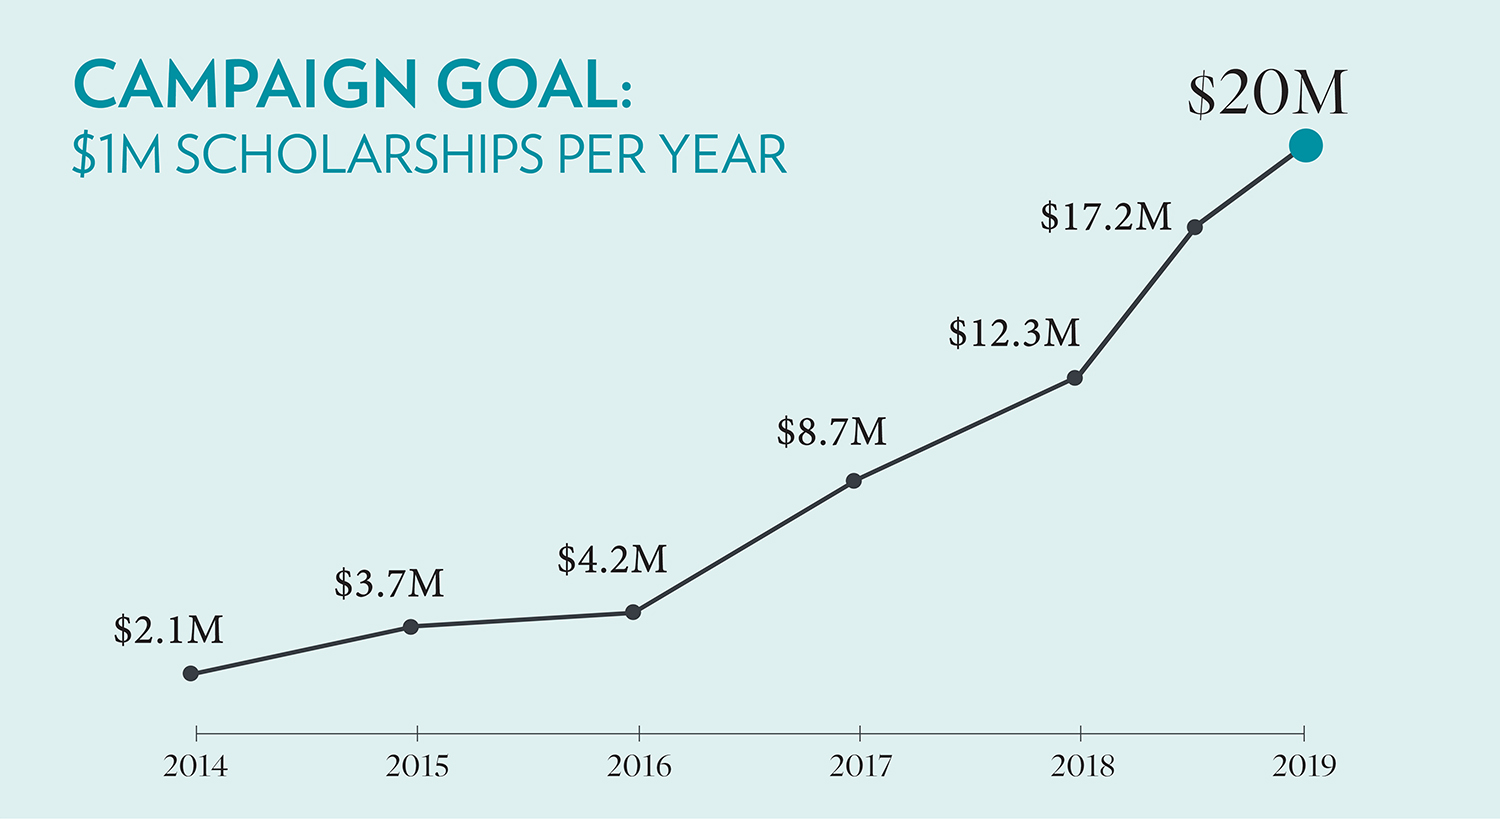 Campaign goal: $1M scholarships per year. Graph showing campaign contributions growing from $2.1 million to $20 million from 2014 to 2019.